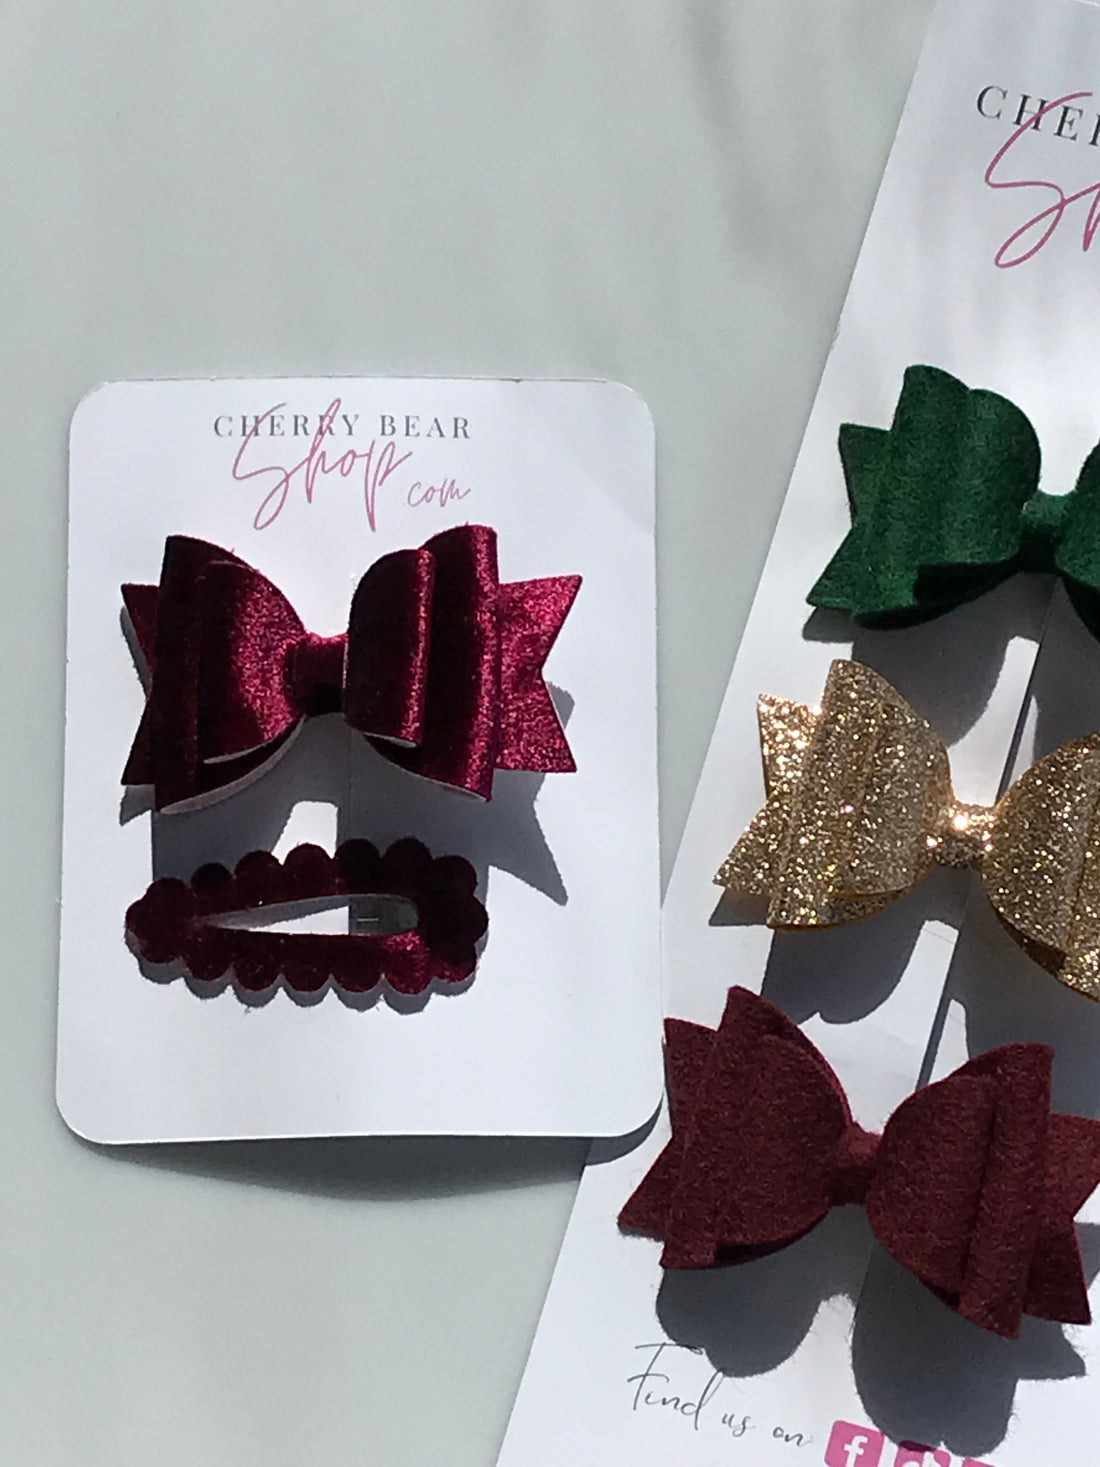 "Adorn in Elegance: Handcrafted Hair Accessories by Cherry Bear"